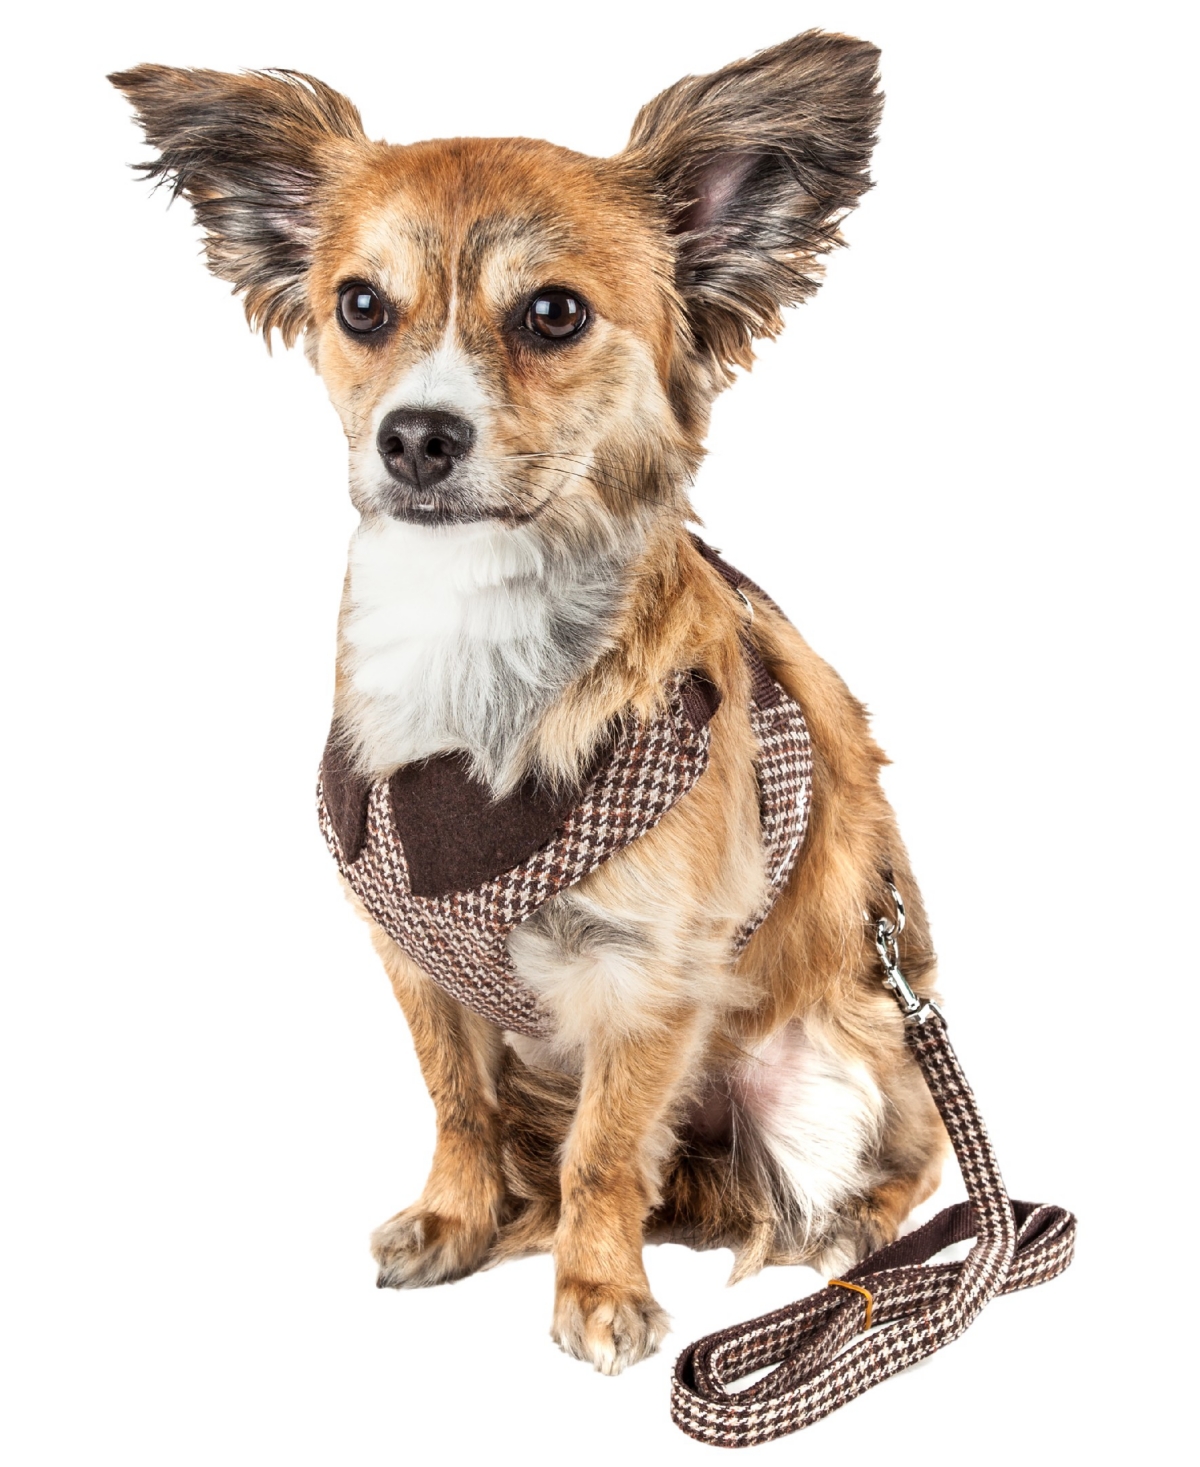 Luxe 'Houndsome' 2-in-1 Reversible Adjustable Dog Harness Leash - Brown